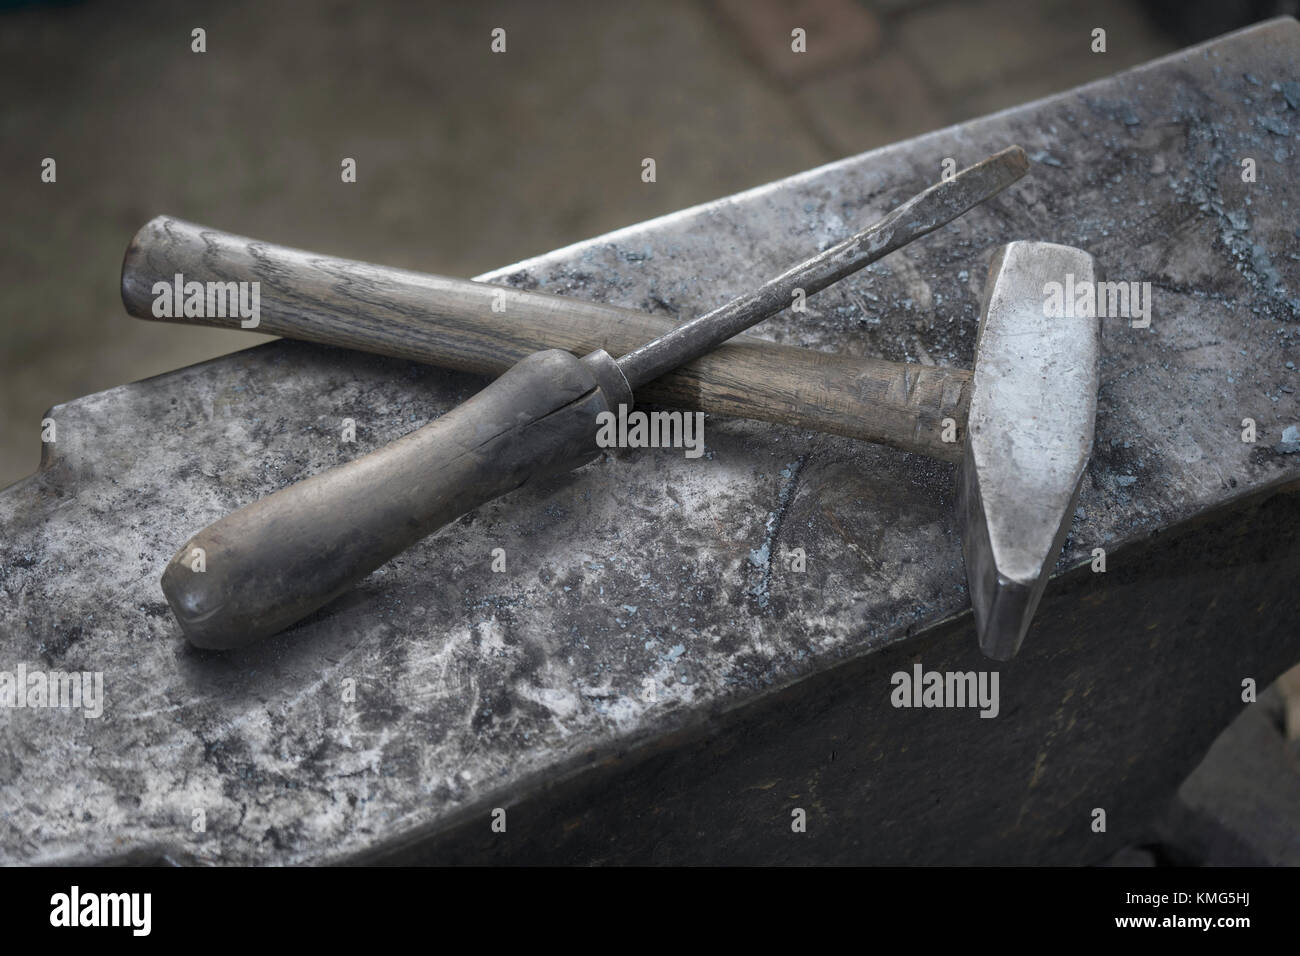 Hammer and screwdriver on anvil at blacksmith shop Stock Photo